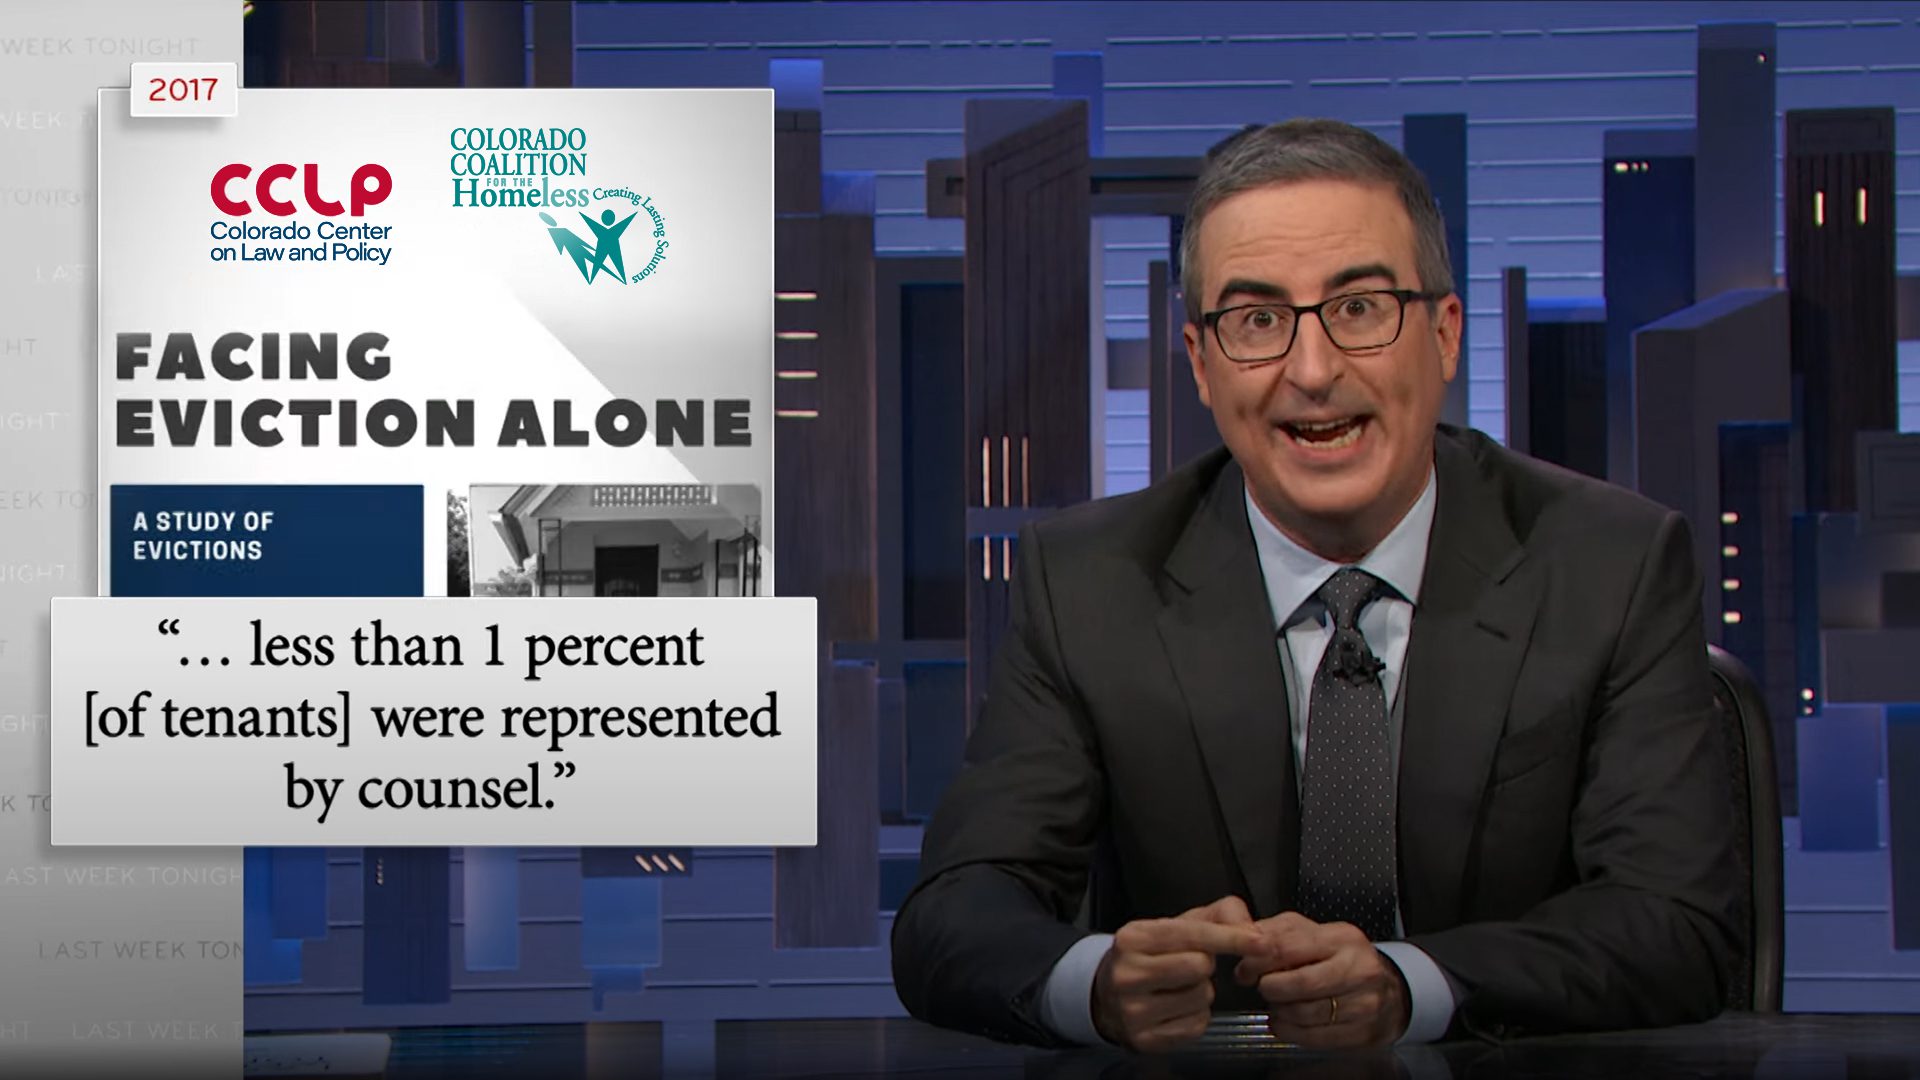 Screencapture of Last Week Tonight with John Oliver featuring CCLP and Colorado Coalition for the Homeless